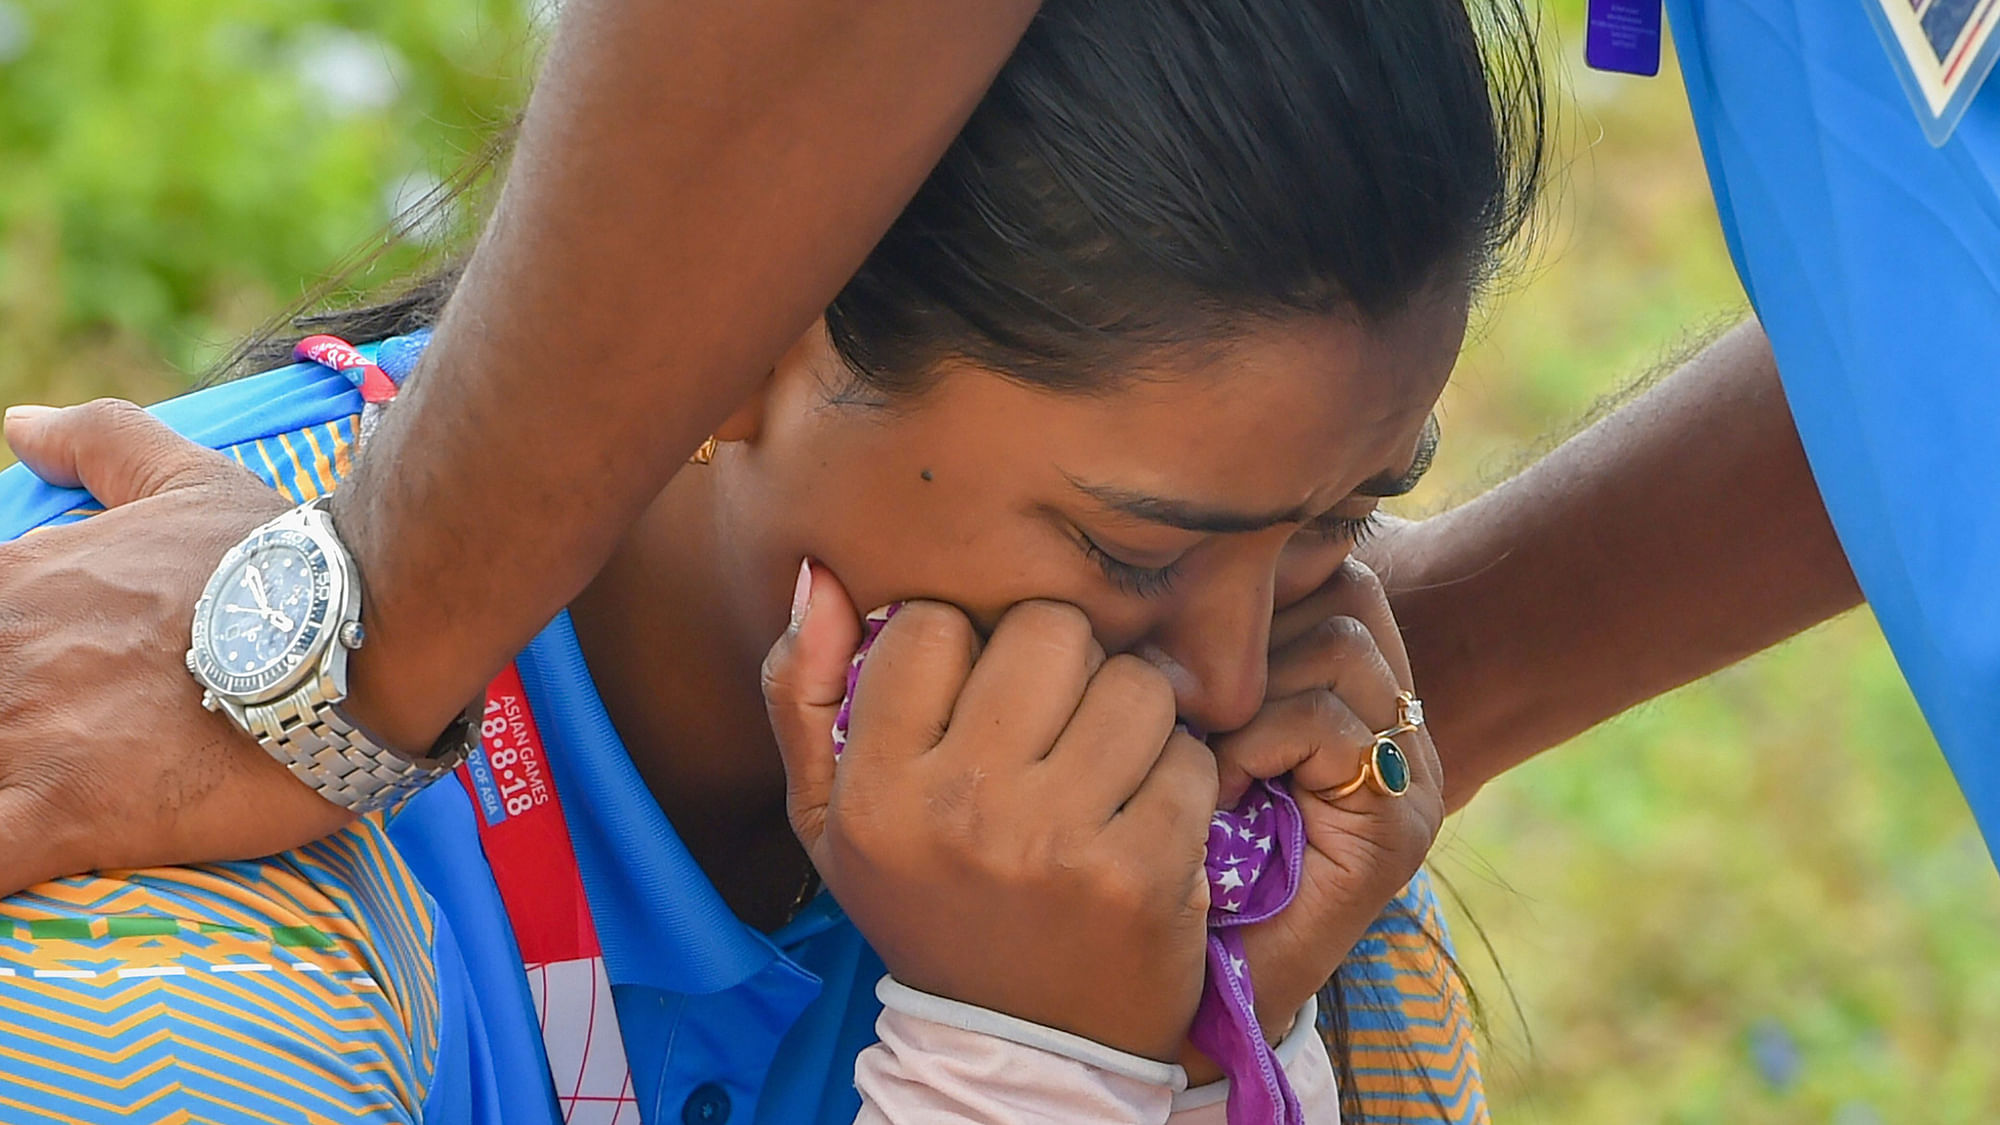 Indian archers Deepika Kumari looks dejected after losing the recurve mixed team elimination event at the Asian Games 2018.